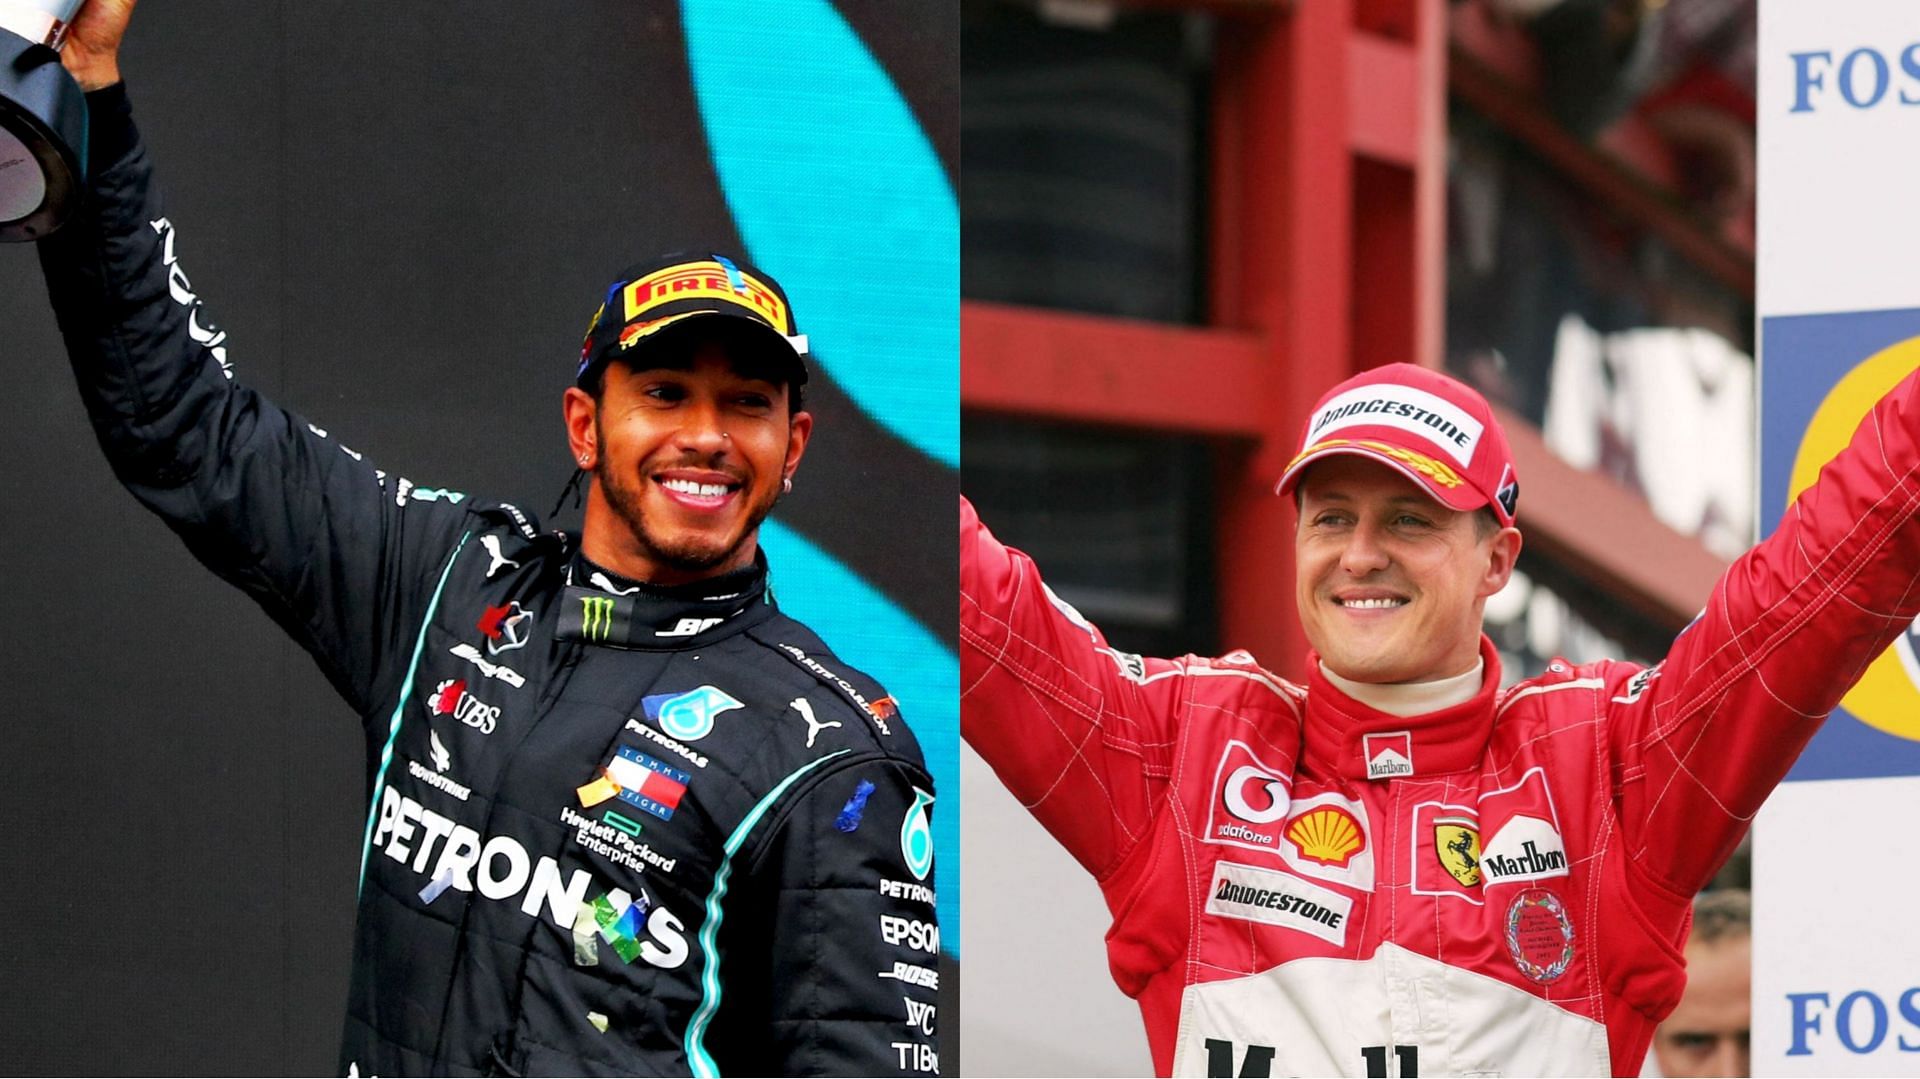 Aldo Costa draws comparisons between the legacy of Lewis Hamilton and Michael Schumacher